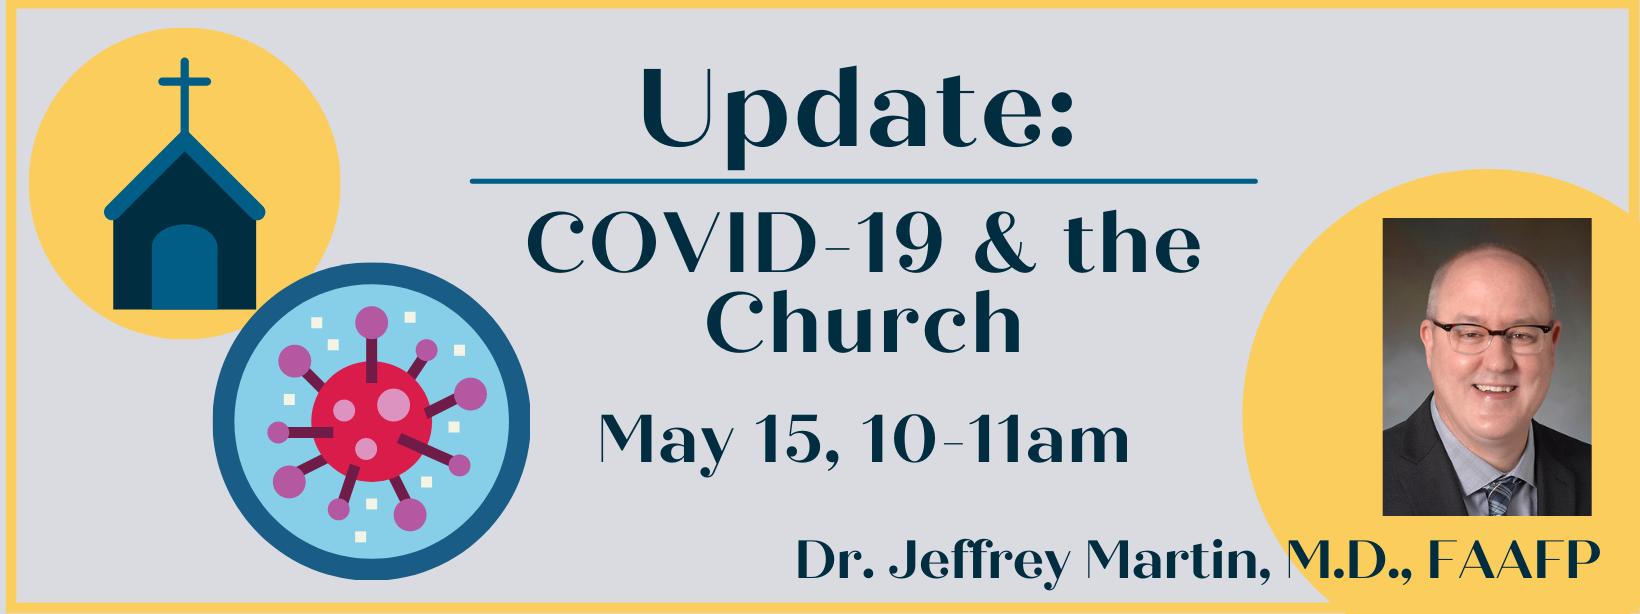 Update: COVID-19 and the Church